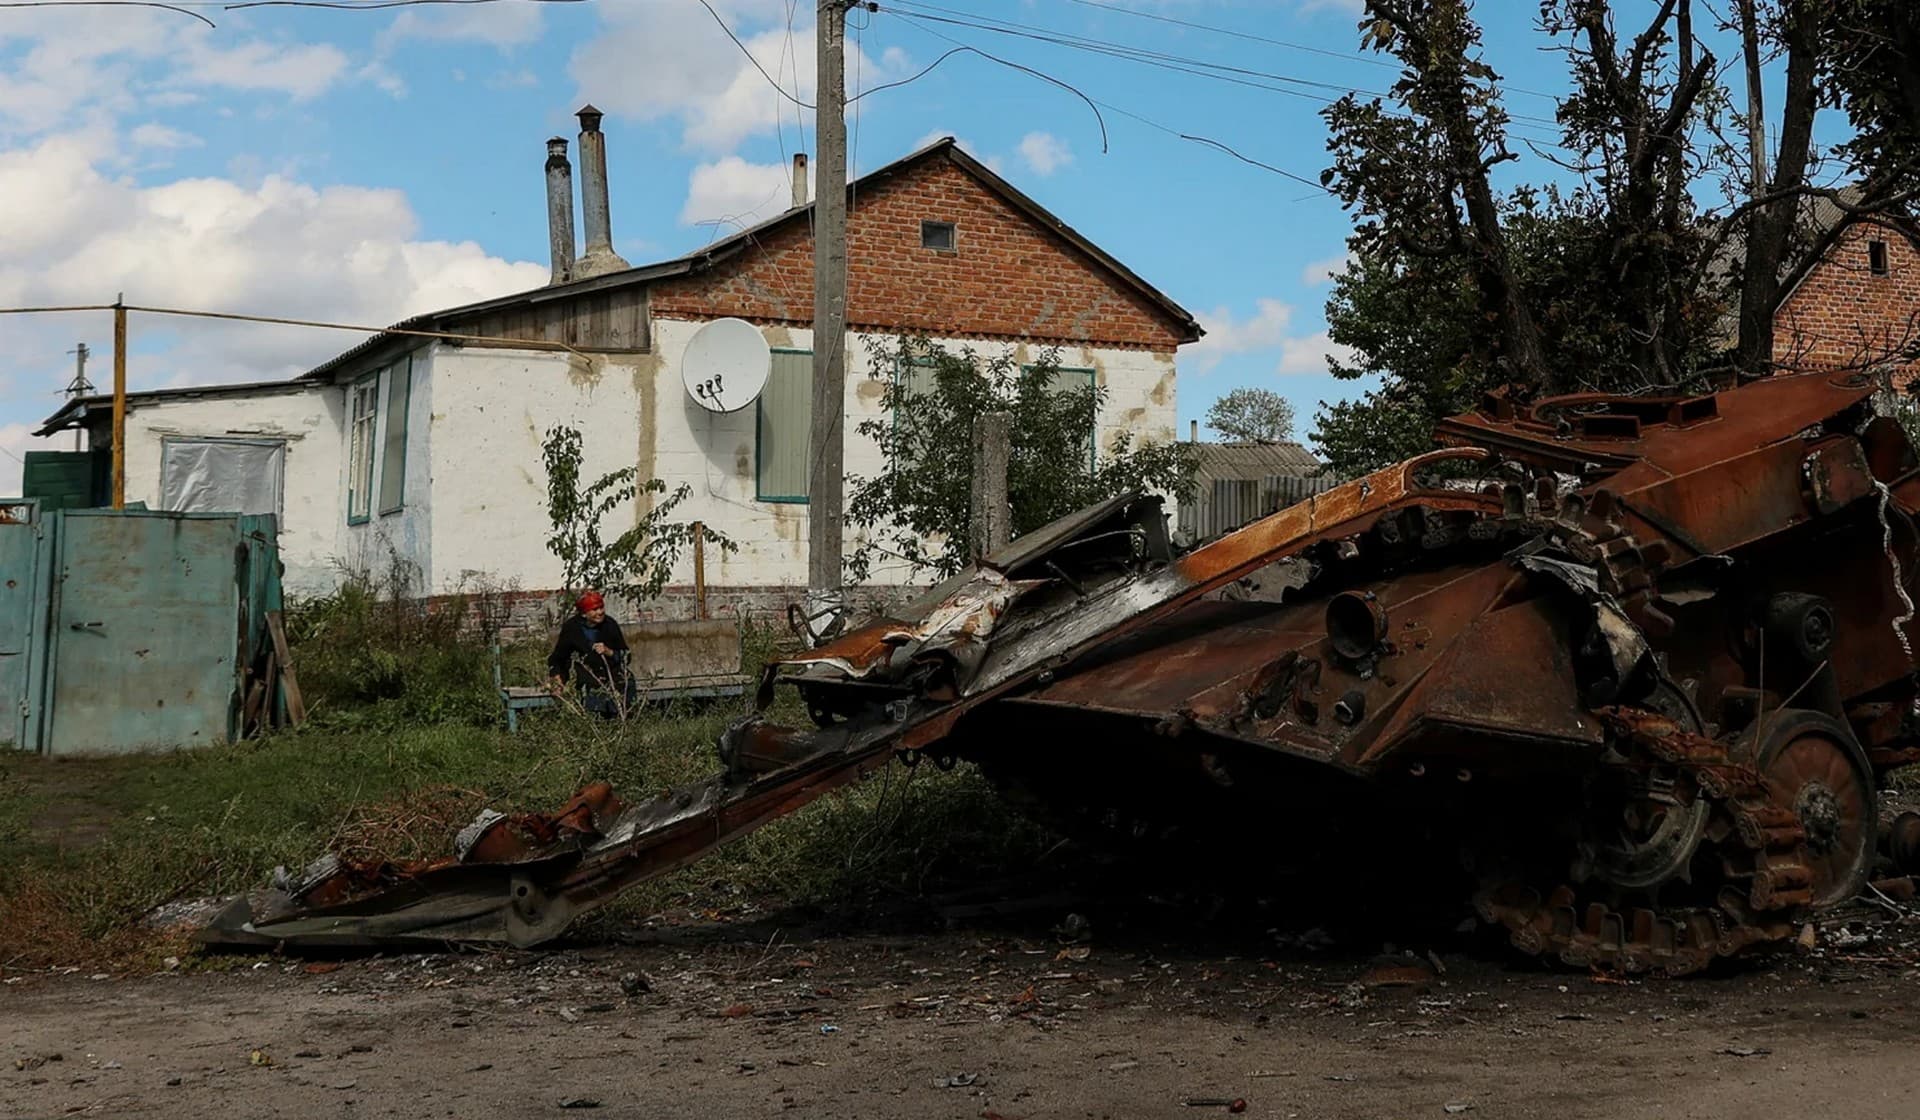 A woman looks at a destroyed Russian armored fighting vehicle in the town of Balakliia